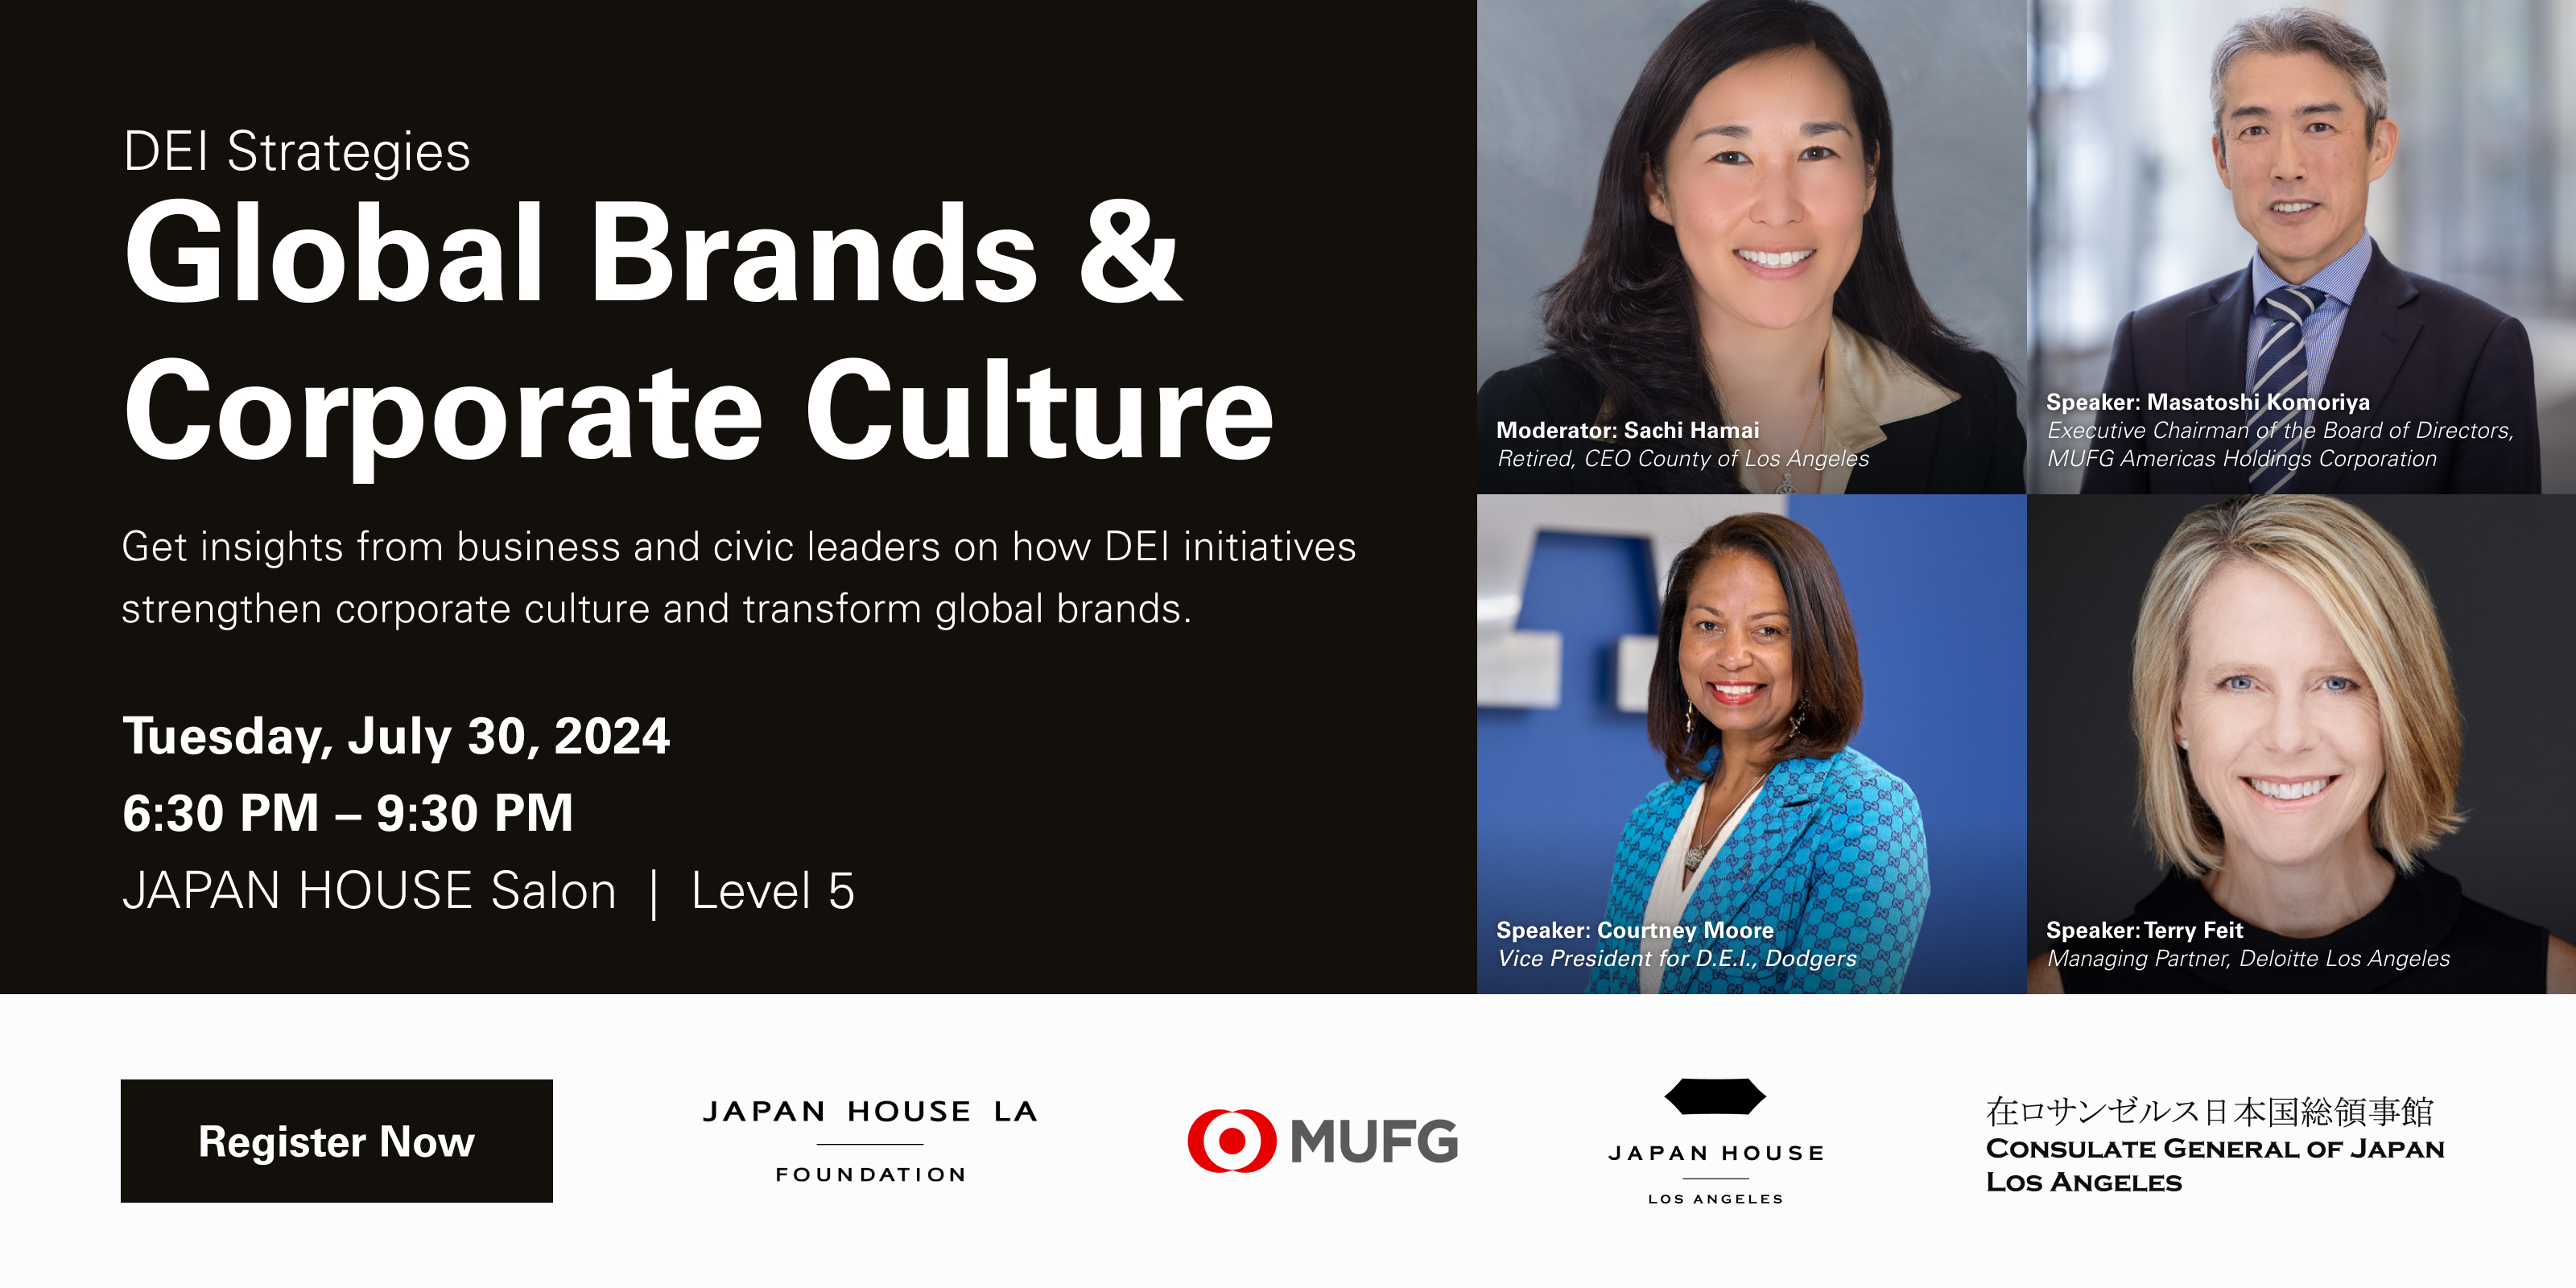 DEl Strategies Global Brands & Corporate Culture Get insights from business and civic leaders on how DEI initiatives strengthen corporate culture and transform global brands. Tuesday, July 30, 2024. 6:30 PM - 9:30 PM. JAPAN HOUSE Salon | Level 5. Moderator: Sachi Hamai Retired, CEO County of Los Angeles. Speaker: Masatoshi Komoriya Executive Chairman of the Board of Directors, MUFG Americas Holdings Corporation. Speaker: Courtney Moore Vice Presideni for D.E.l., Dodgers. Speaker: Terry Feit Managing Partner